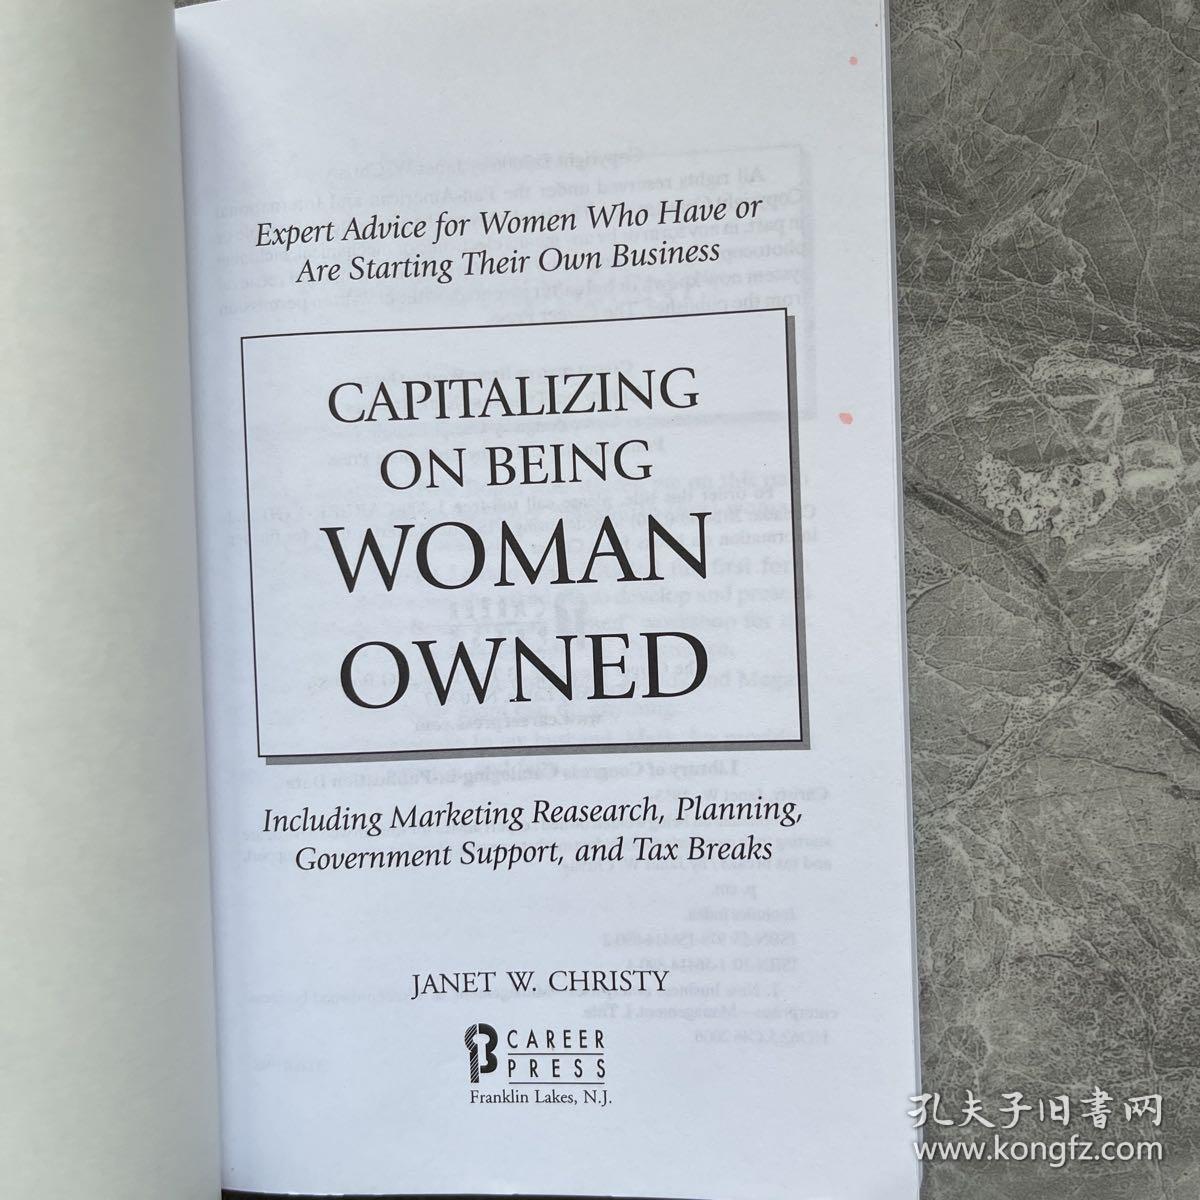 CAPITALIZING ON BEING WOMAN OWNED